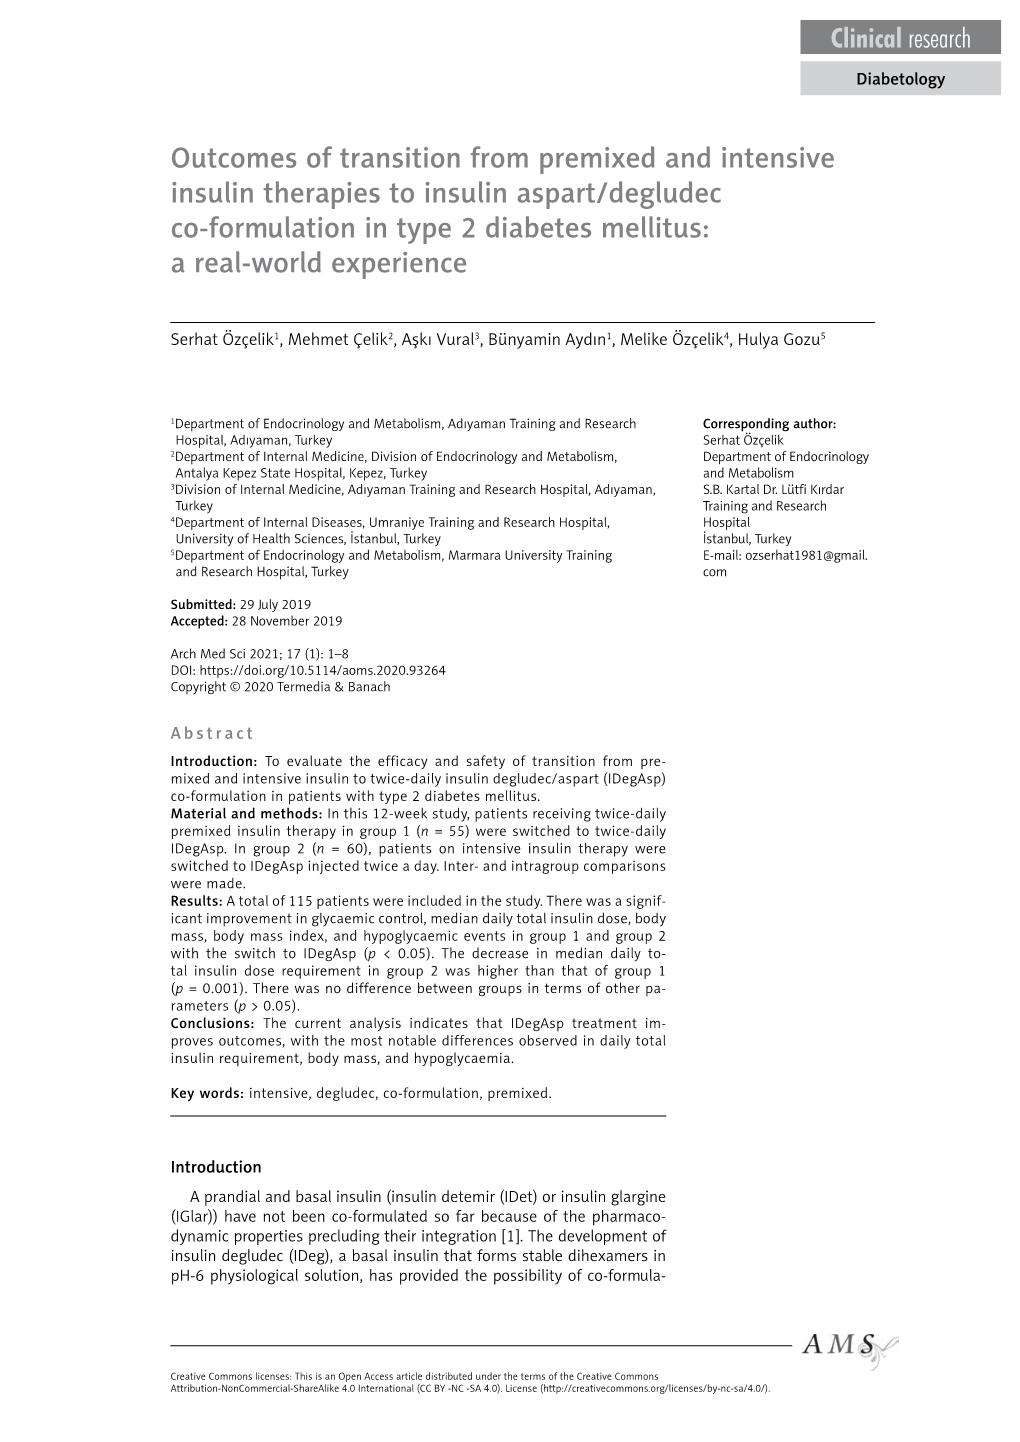 Outcomes of Transition from Premixed and Intensive Insulin Therapies to Insulin Aspart/Degludec Co-Formulation in Type 2 Diabetes Mellitus: a Real-World Experience